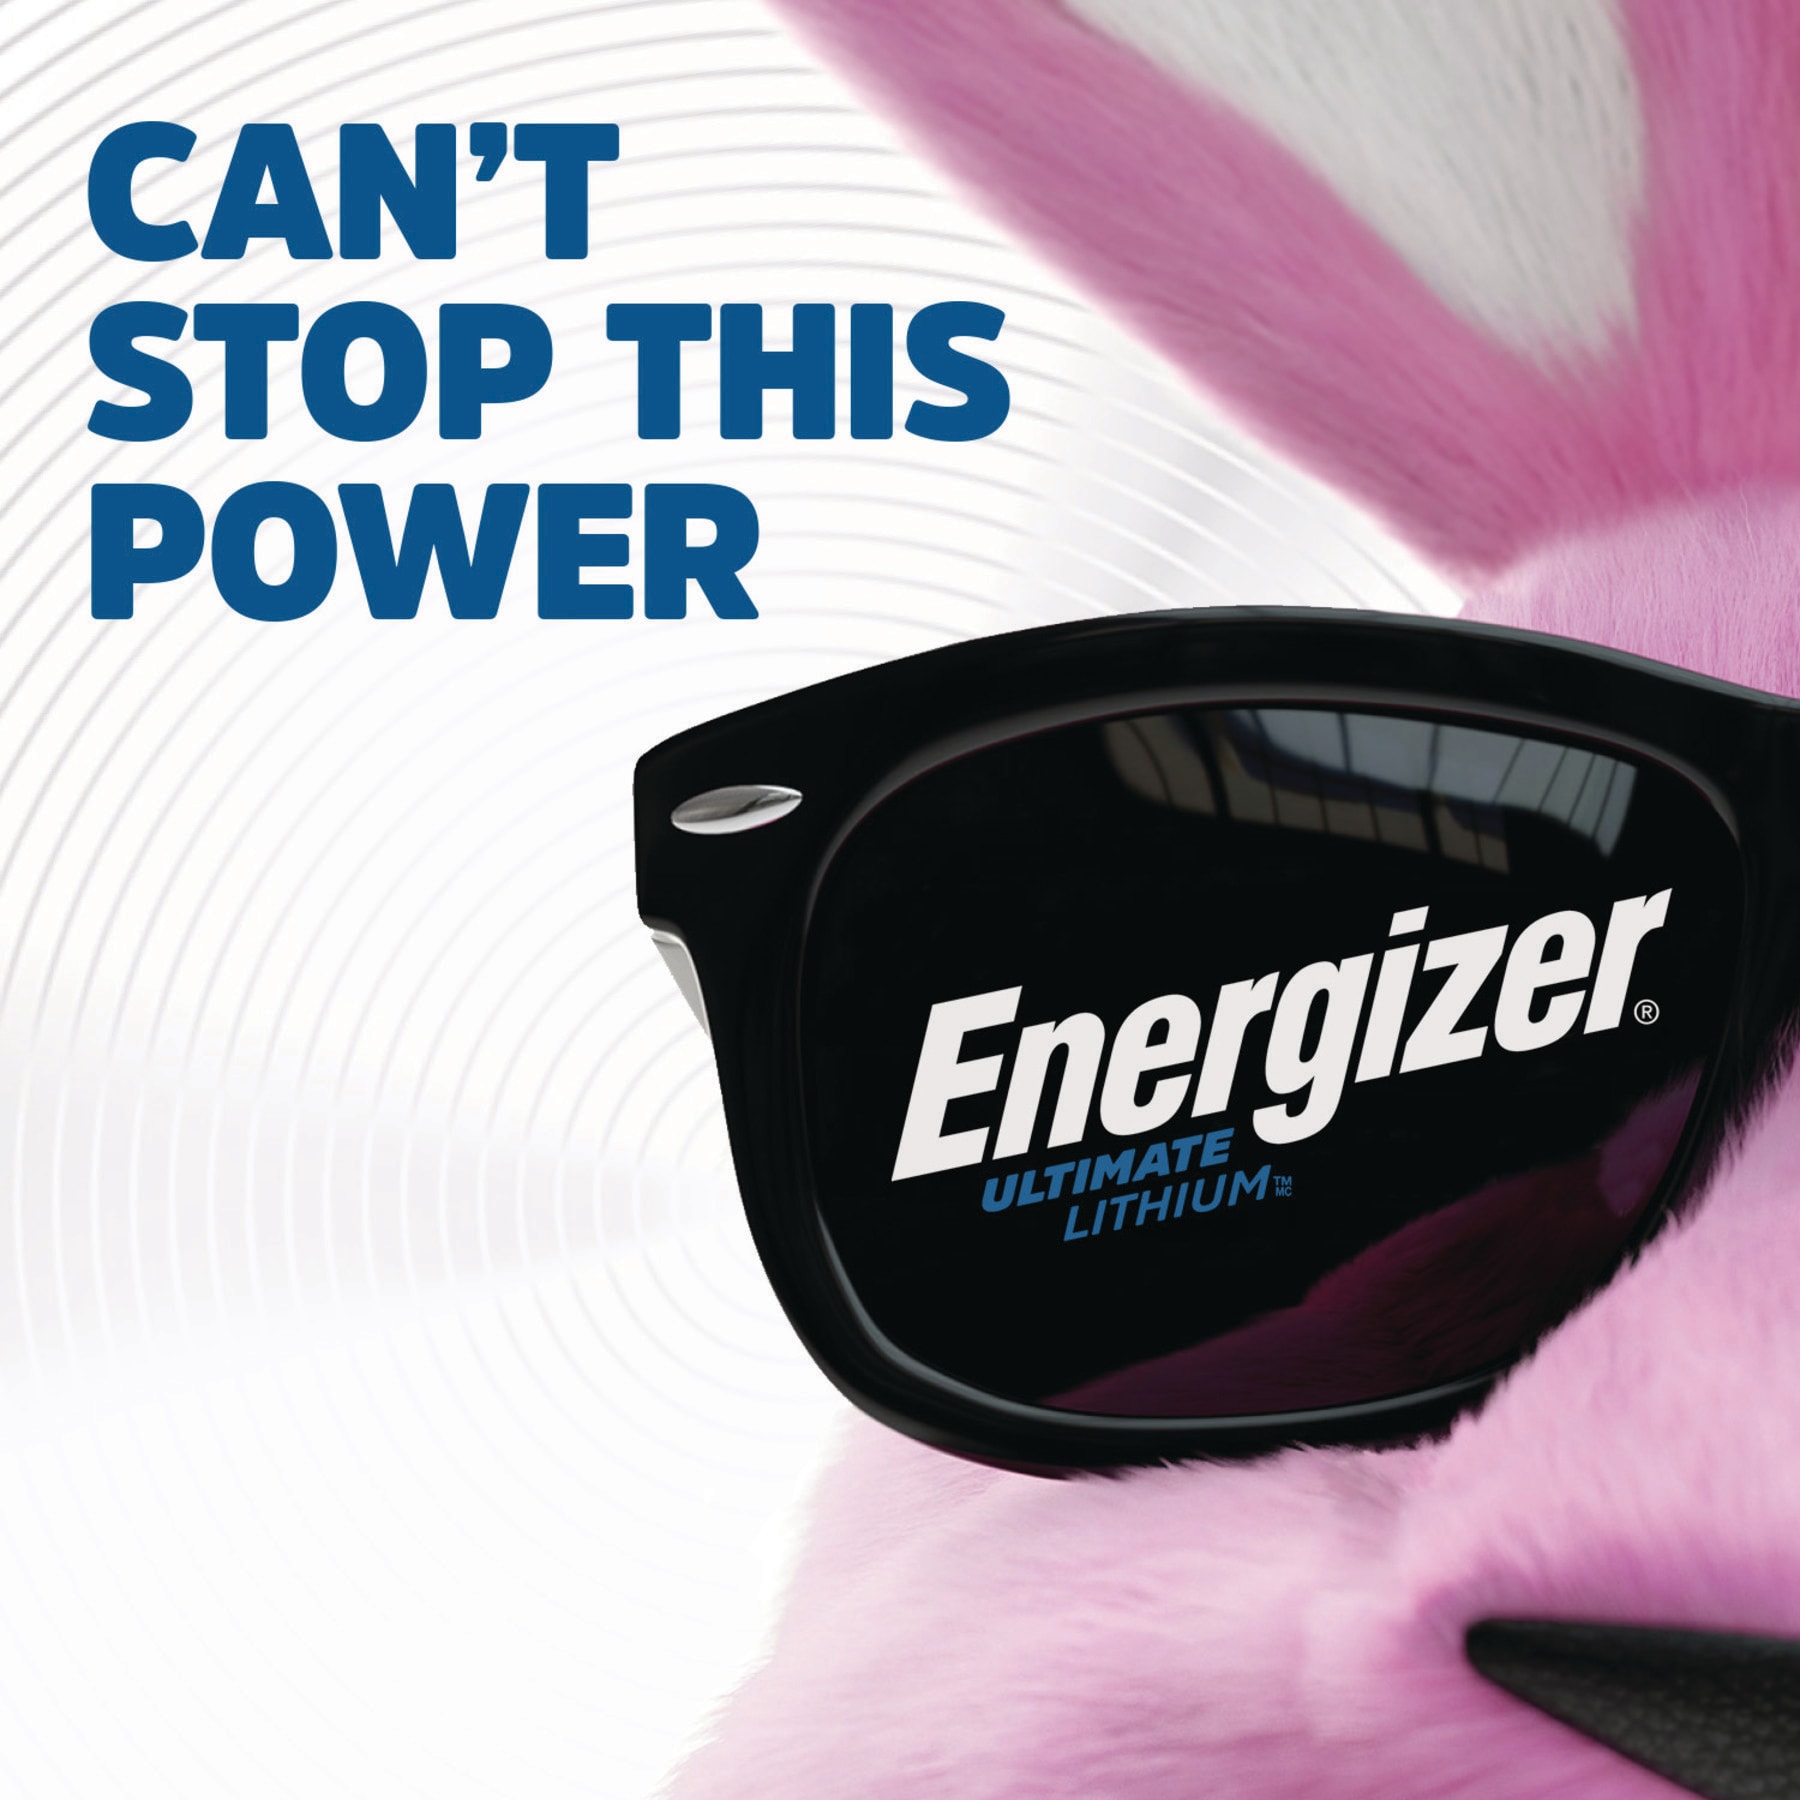 Energizer Ultimate AAA Lithium Battery (12-Pack) - Gillman Home Center